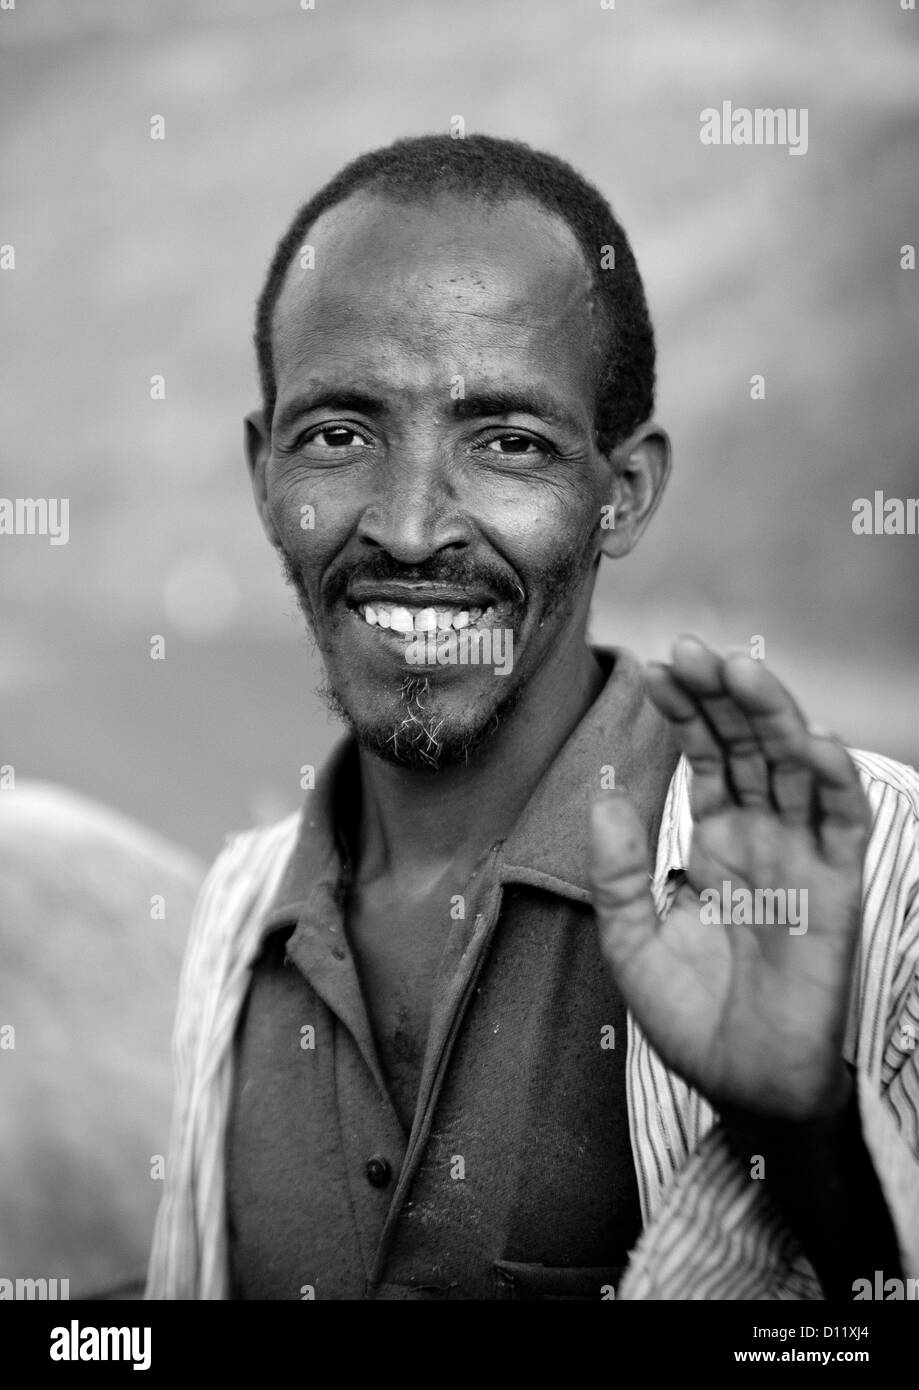 Black And White Portrait Of A Man With Toothy Smile Waving At Camera, Dire Dawa, Ethiopia Stock Photo